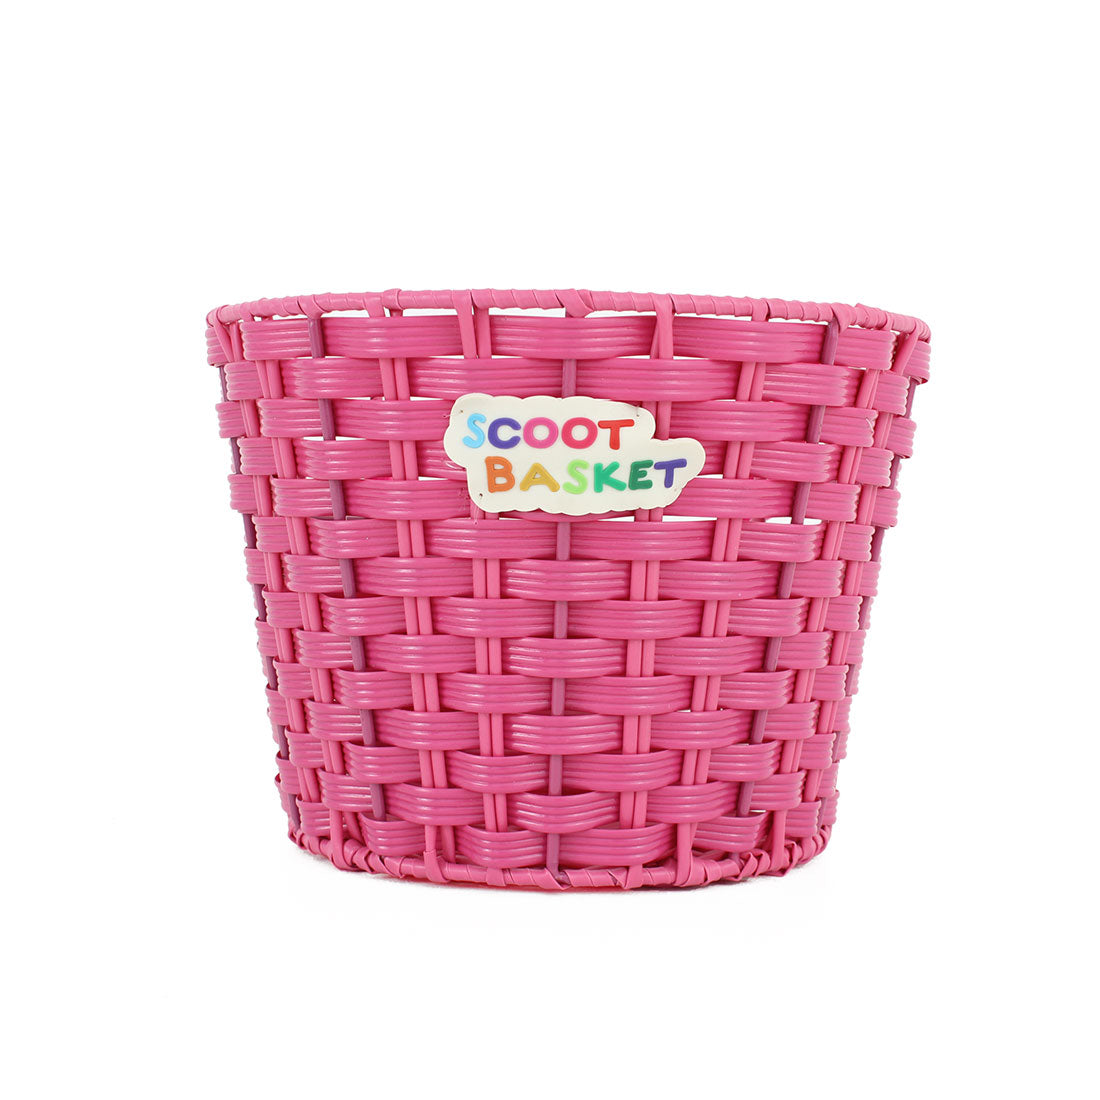 Micro Scooter Basket - Pink Scooter Accessories